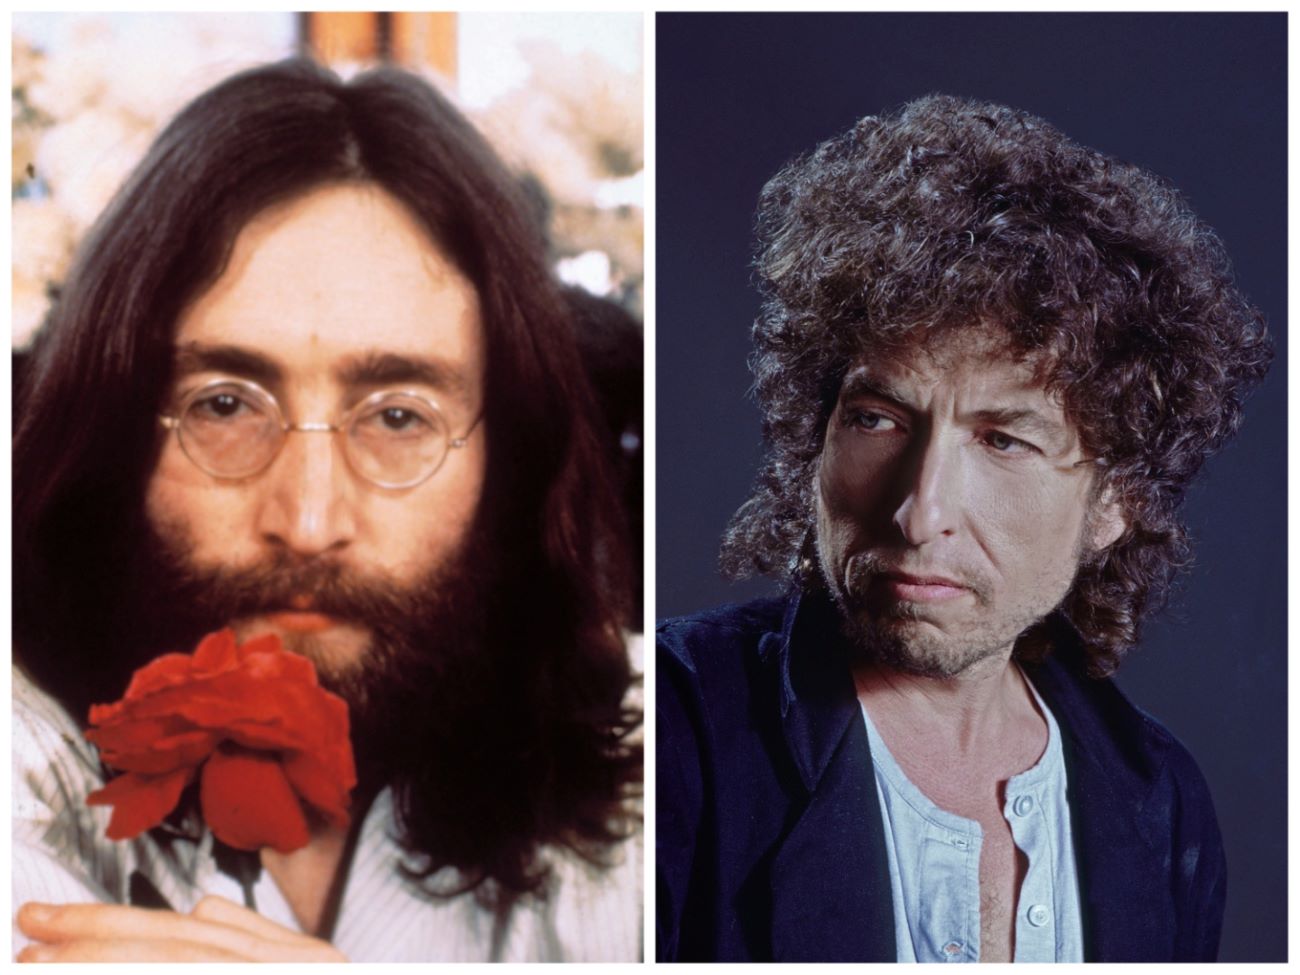 John Lennon wears glasses and holds a red flower up to his face. Bob Dylan wears a blue shirt and black jacket.